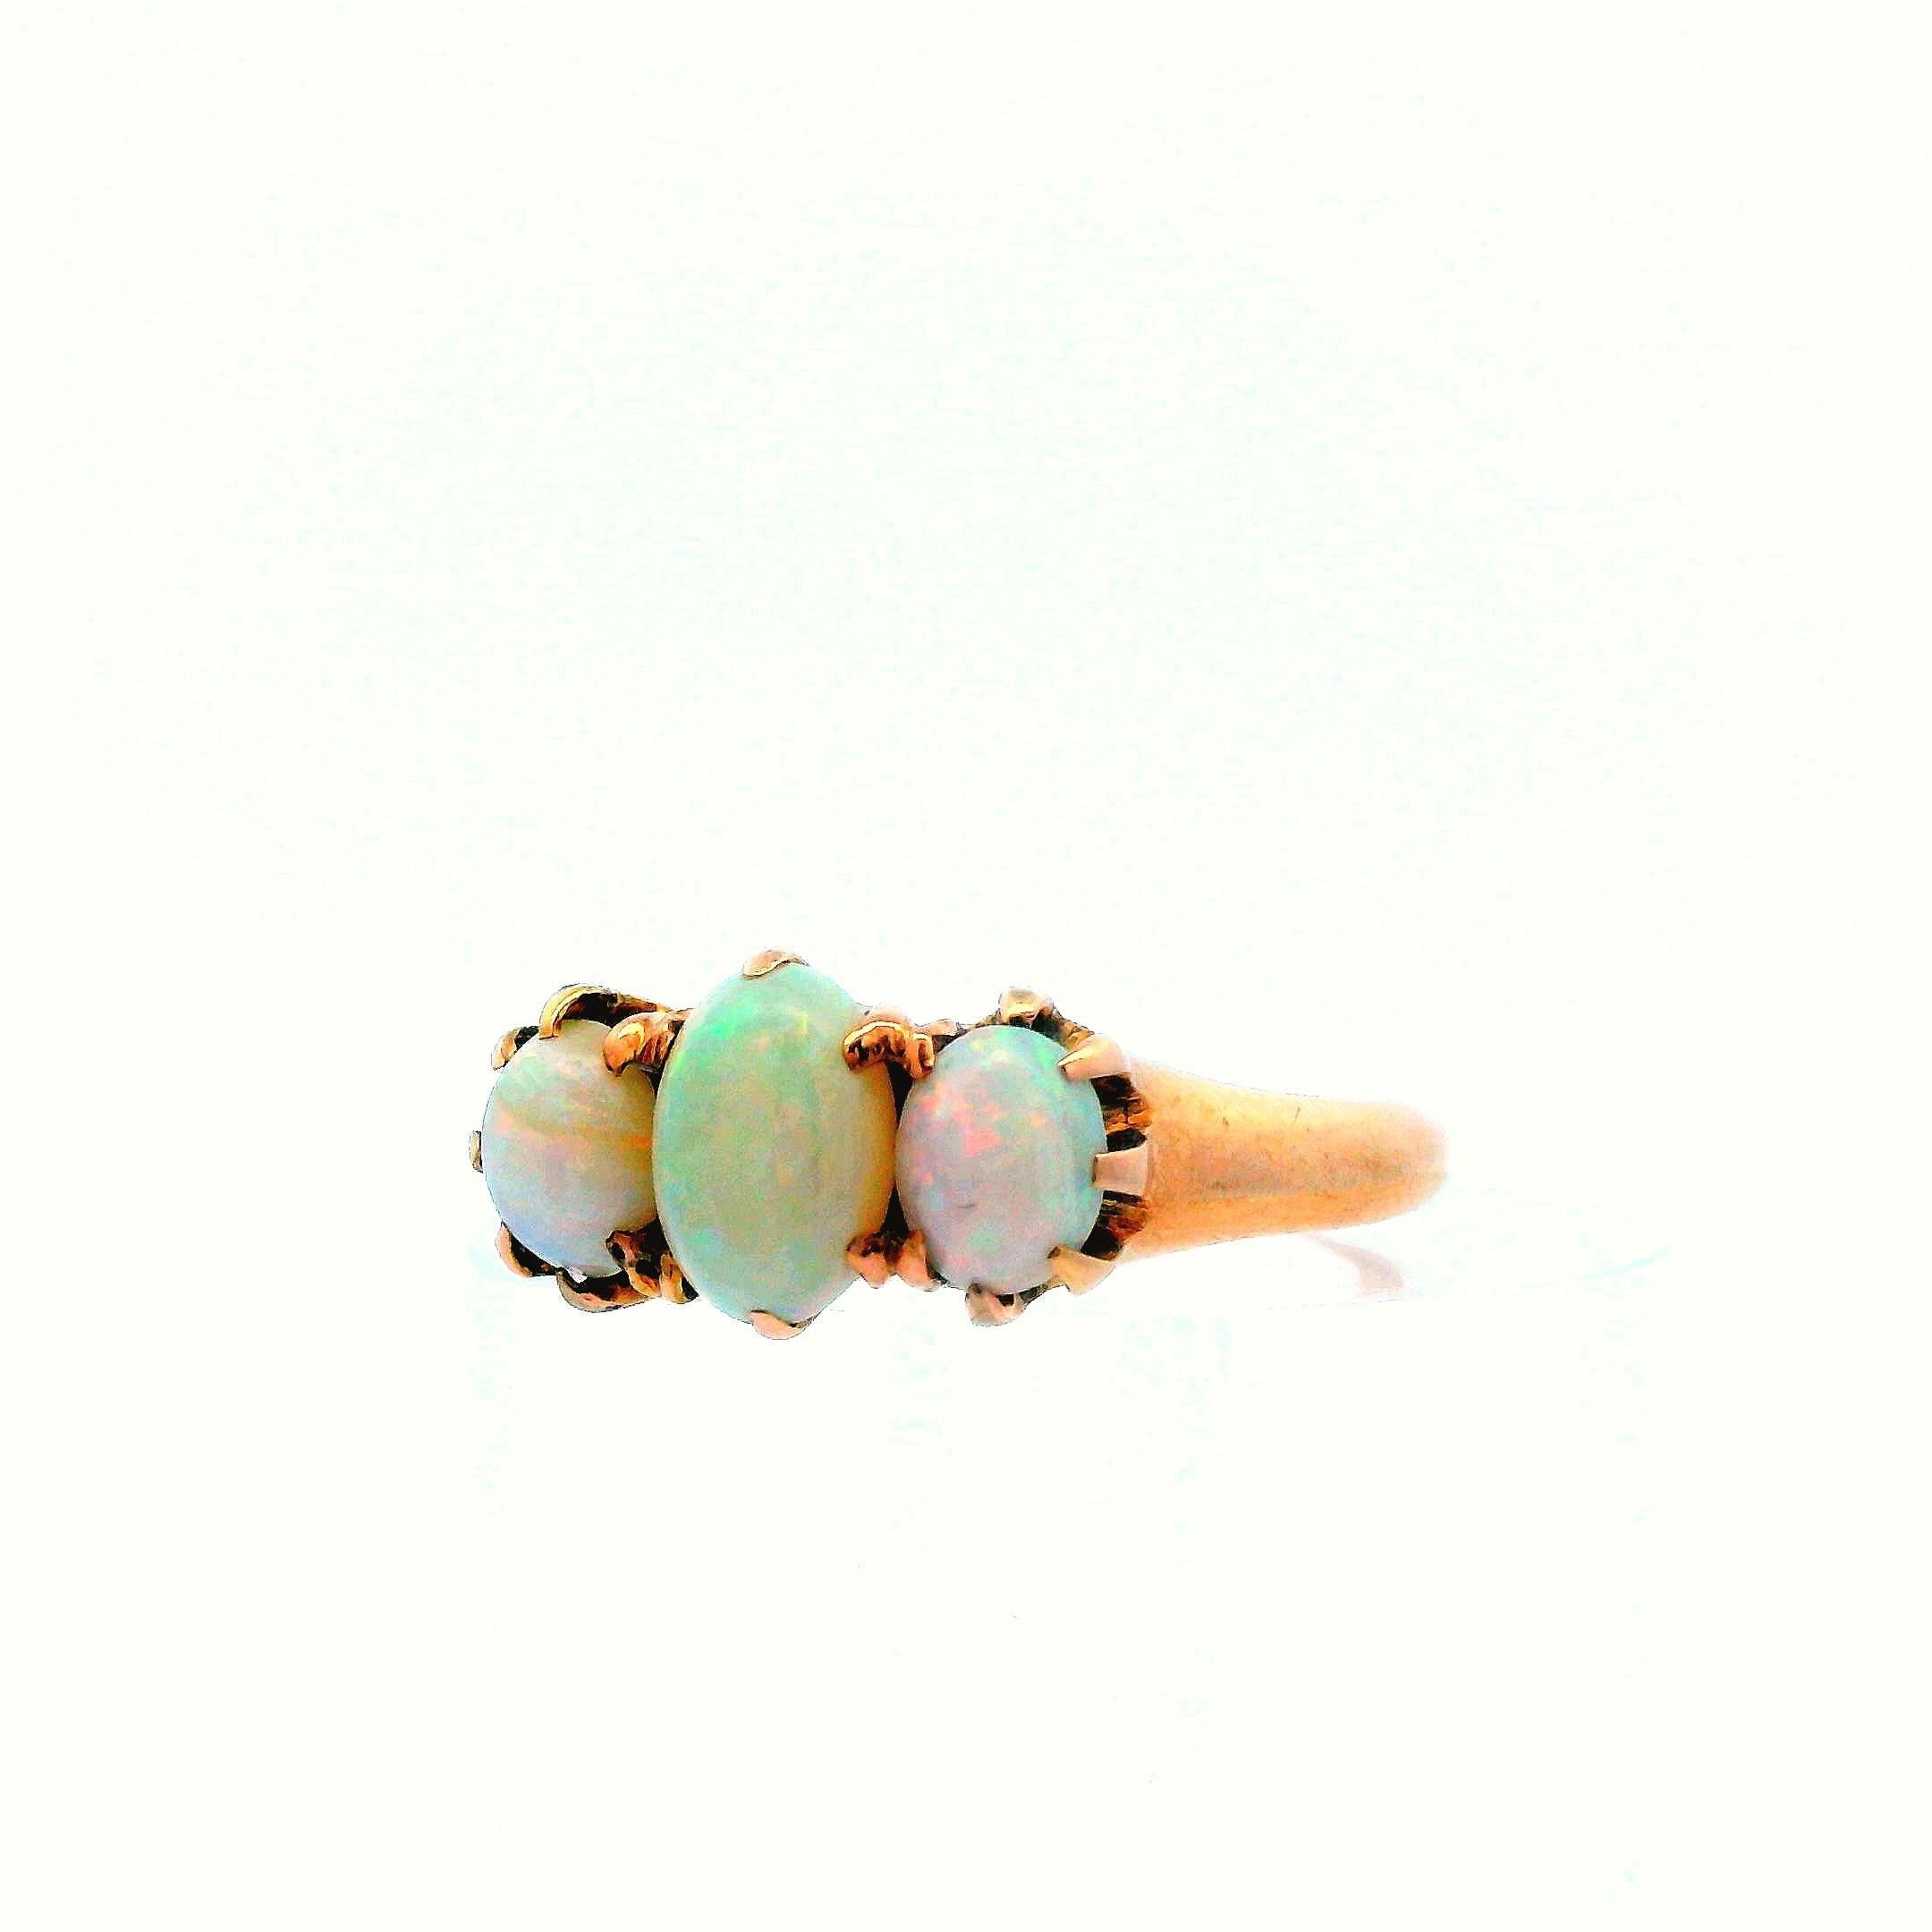 This is a gorgeous, 1910 Edwardian, 14k yellow gold and opal ring. This ring is very unique, featuring three cabochon cut opals with excellent body color. The wide range of body color provides a beautiful layer of sparkle, and also allows for this